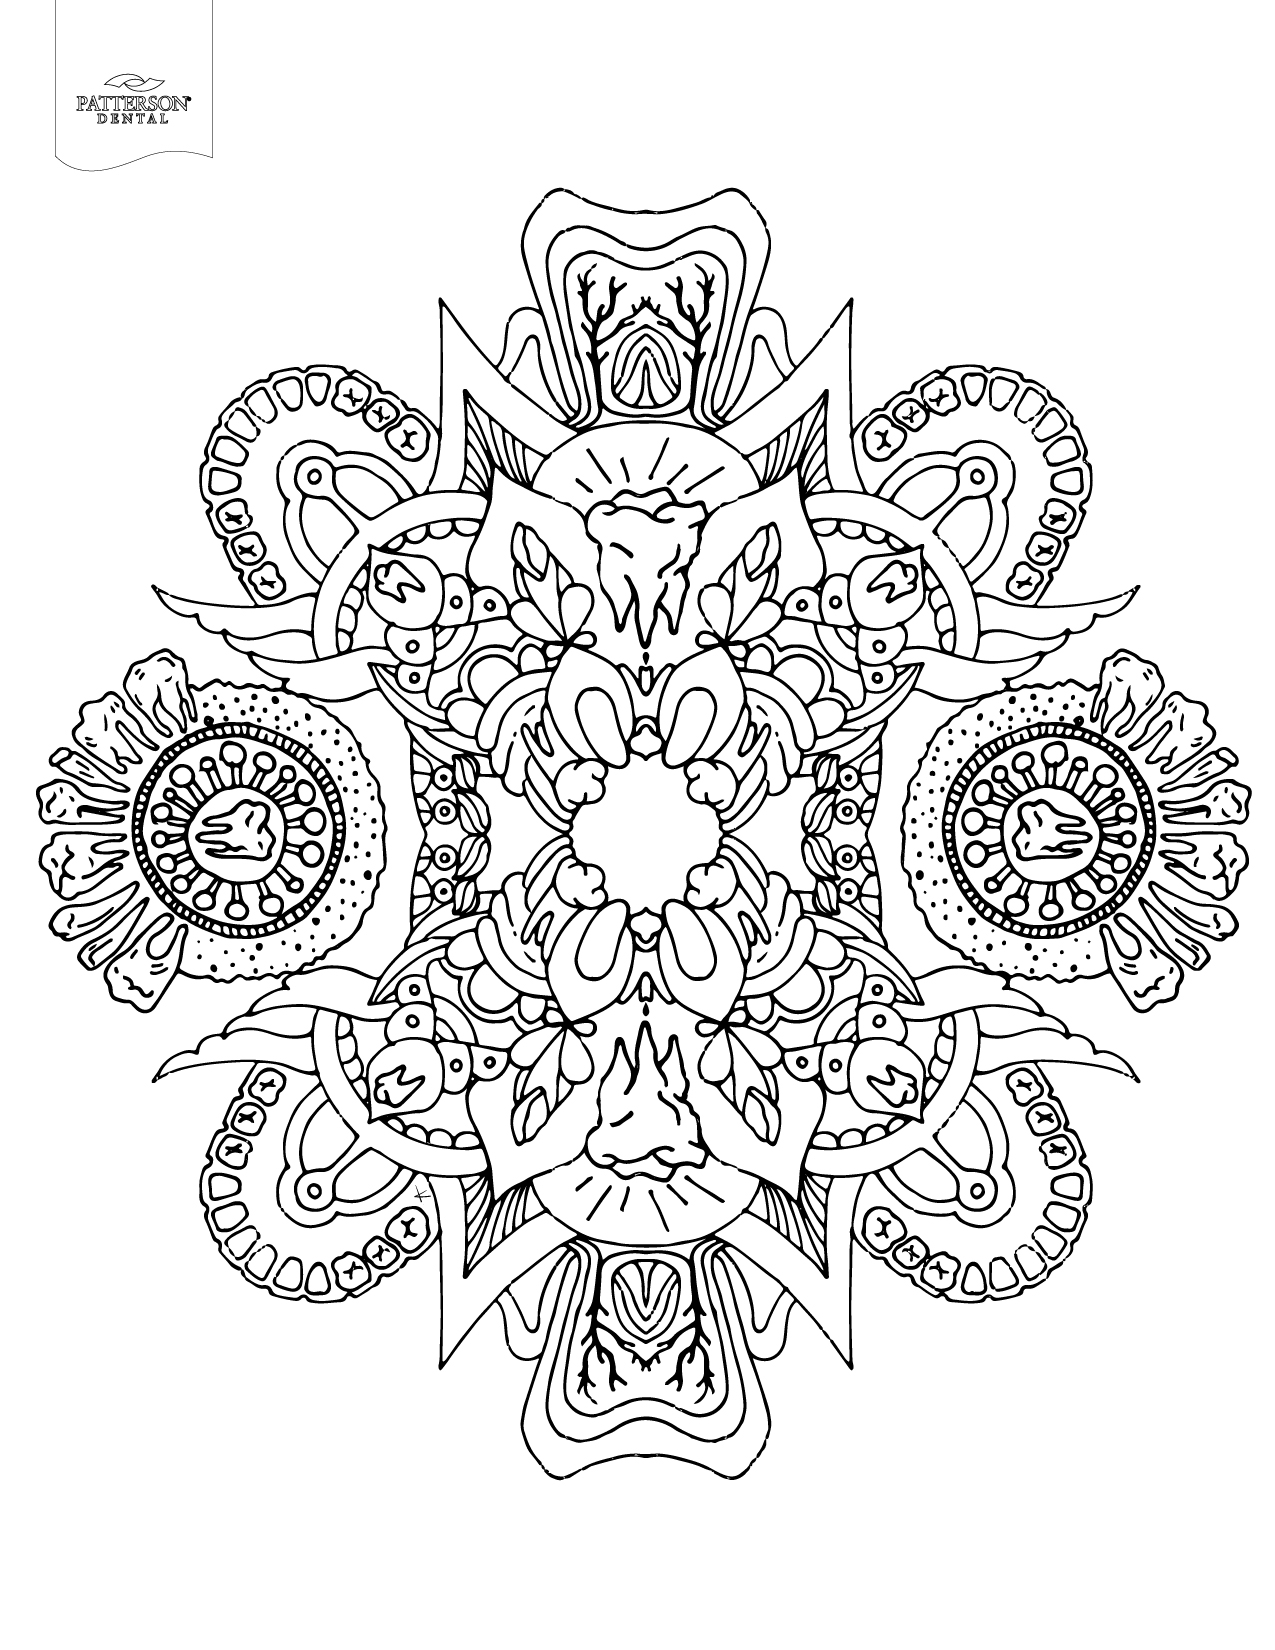 Download 10 Toothy Adult Coloring Pages Printable - Off The Cusp